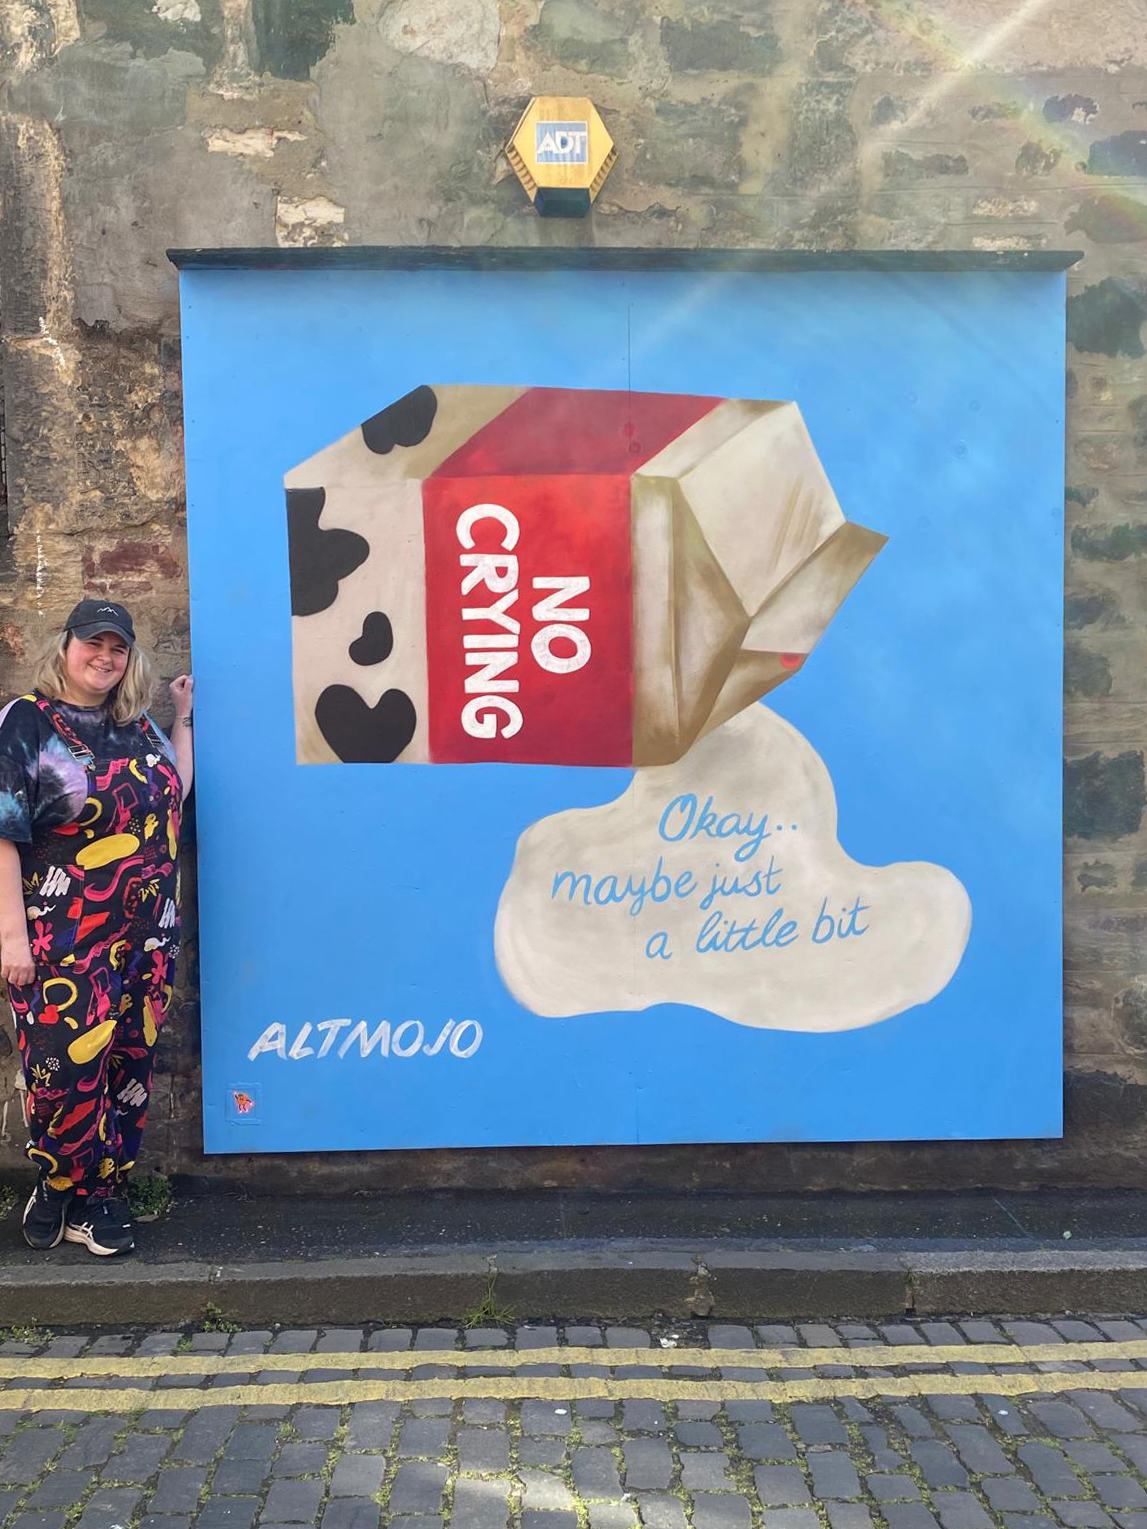 Altmojo posing next to street art painted at Quality Yard in Leith